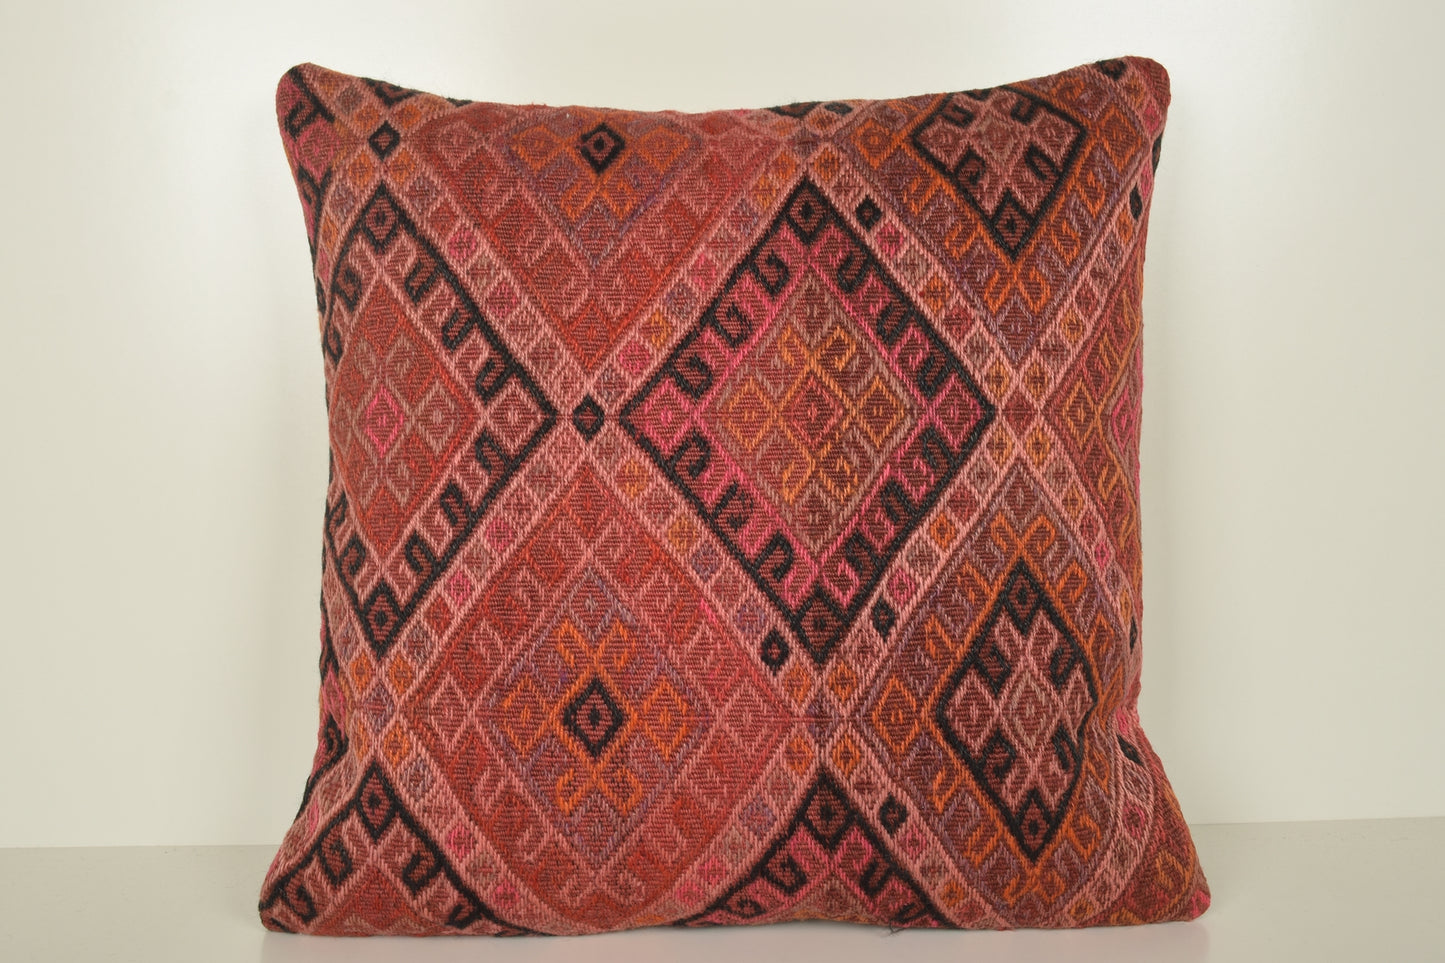 Kilim Patterned Pillow A00825 Crochet pillowcase Outdoor throw pillow cover 24x24